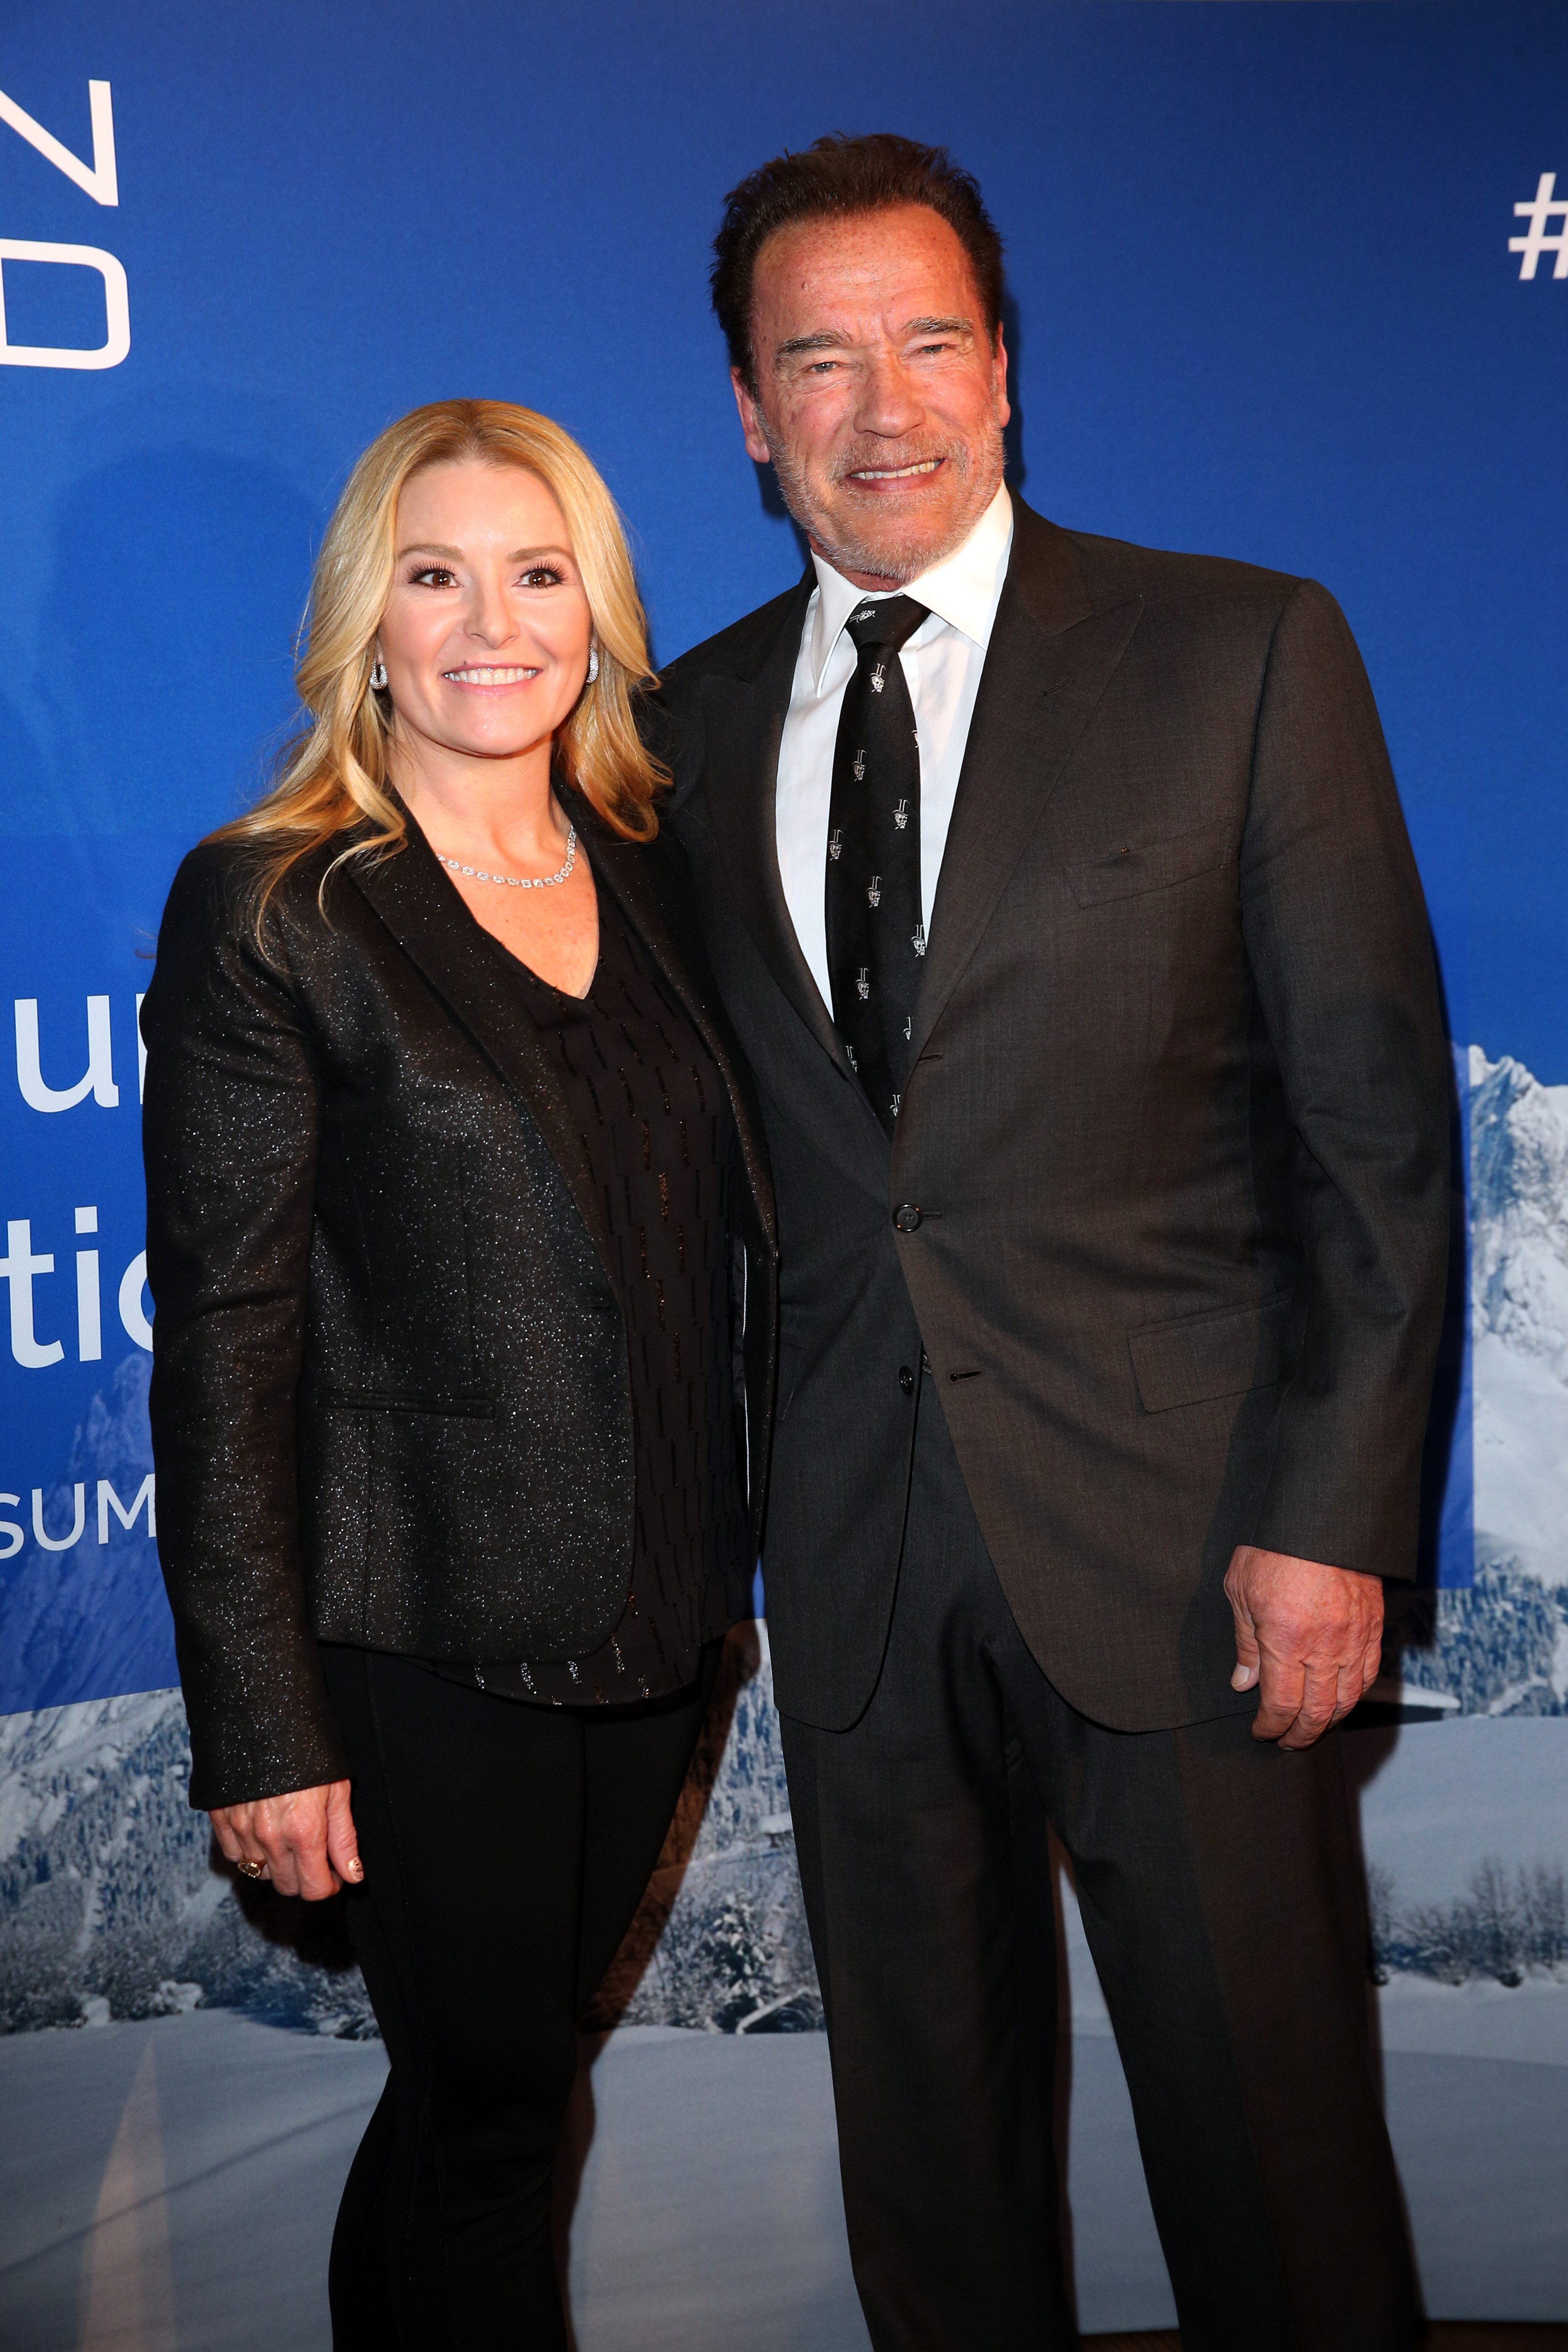 Heather Milligan and Arnold Schwarzenegger at the Schwarzenegger climate initiative charity dinner in Kitzbuehel, 2020 | Source: Getty Images